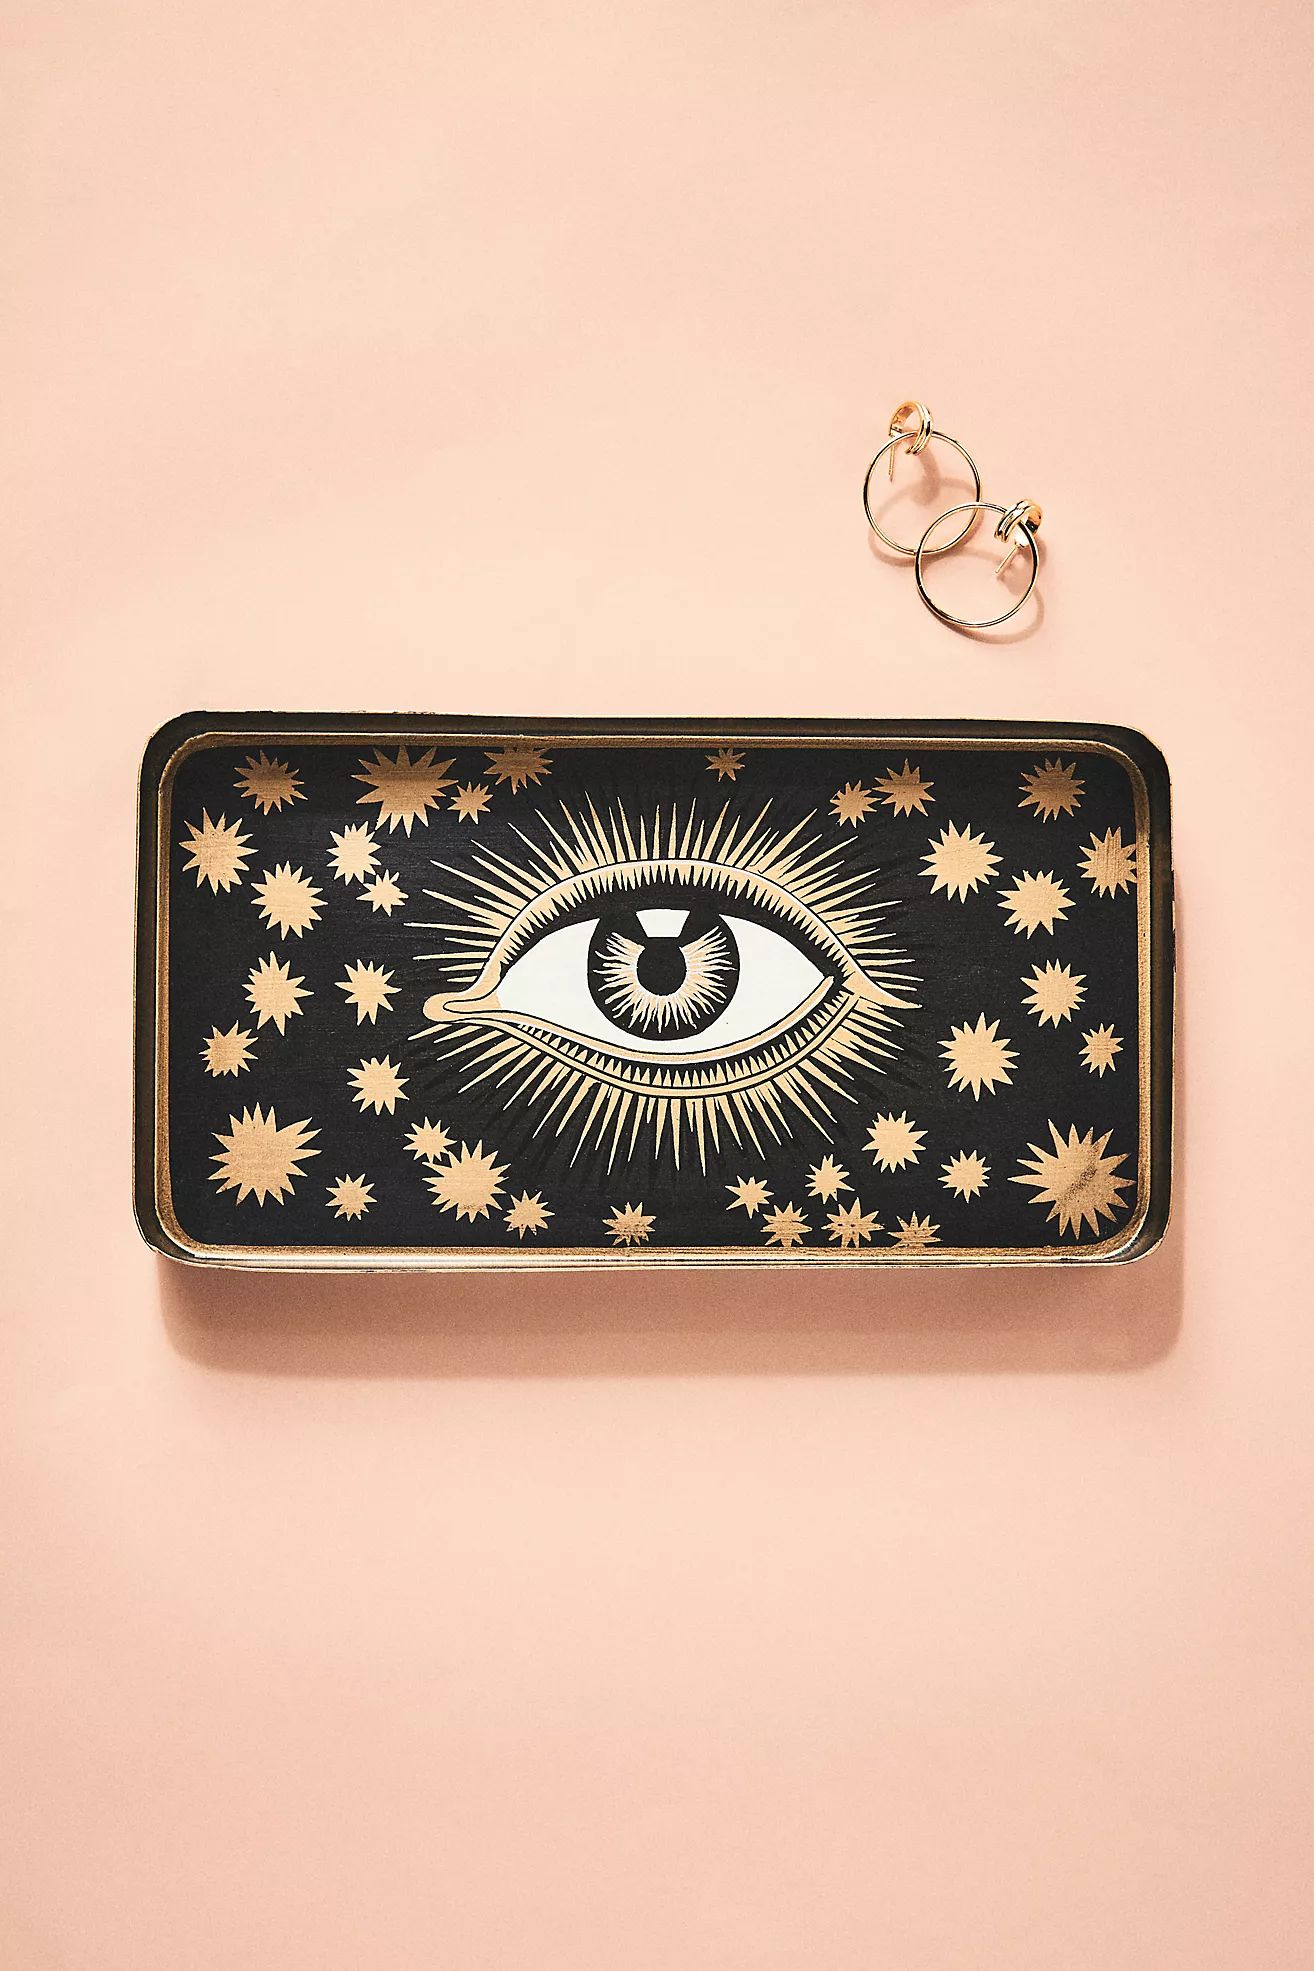 Les Ottomans Handpainted Eye Tray | Anthropologie (US)